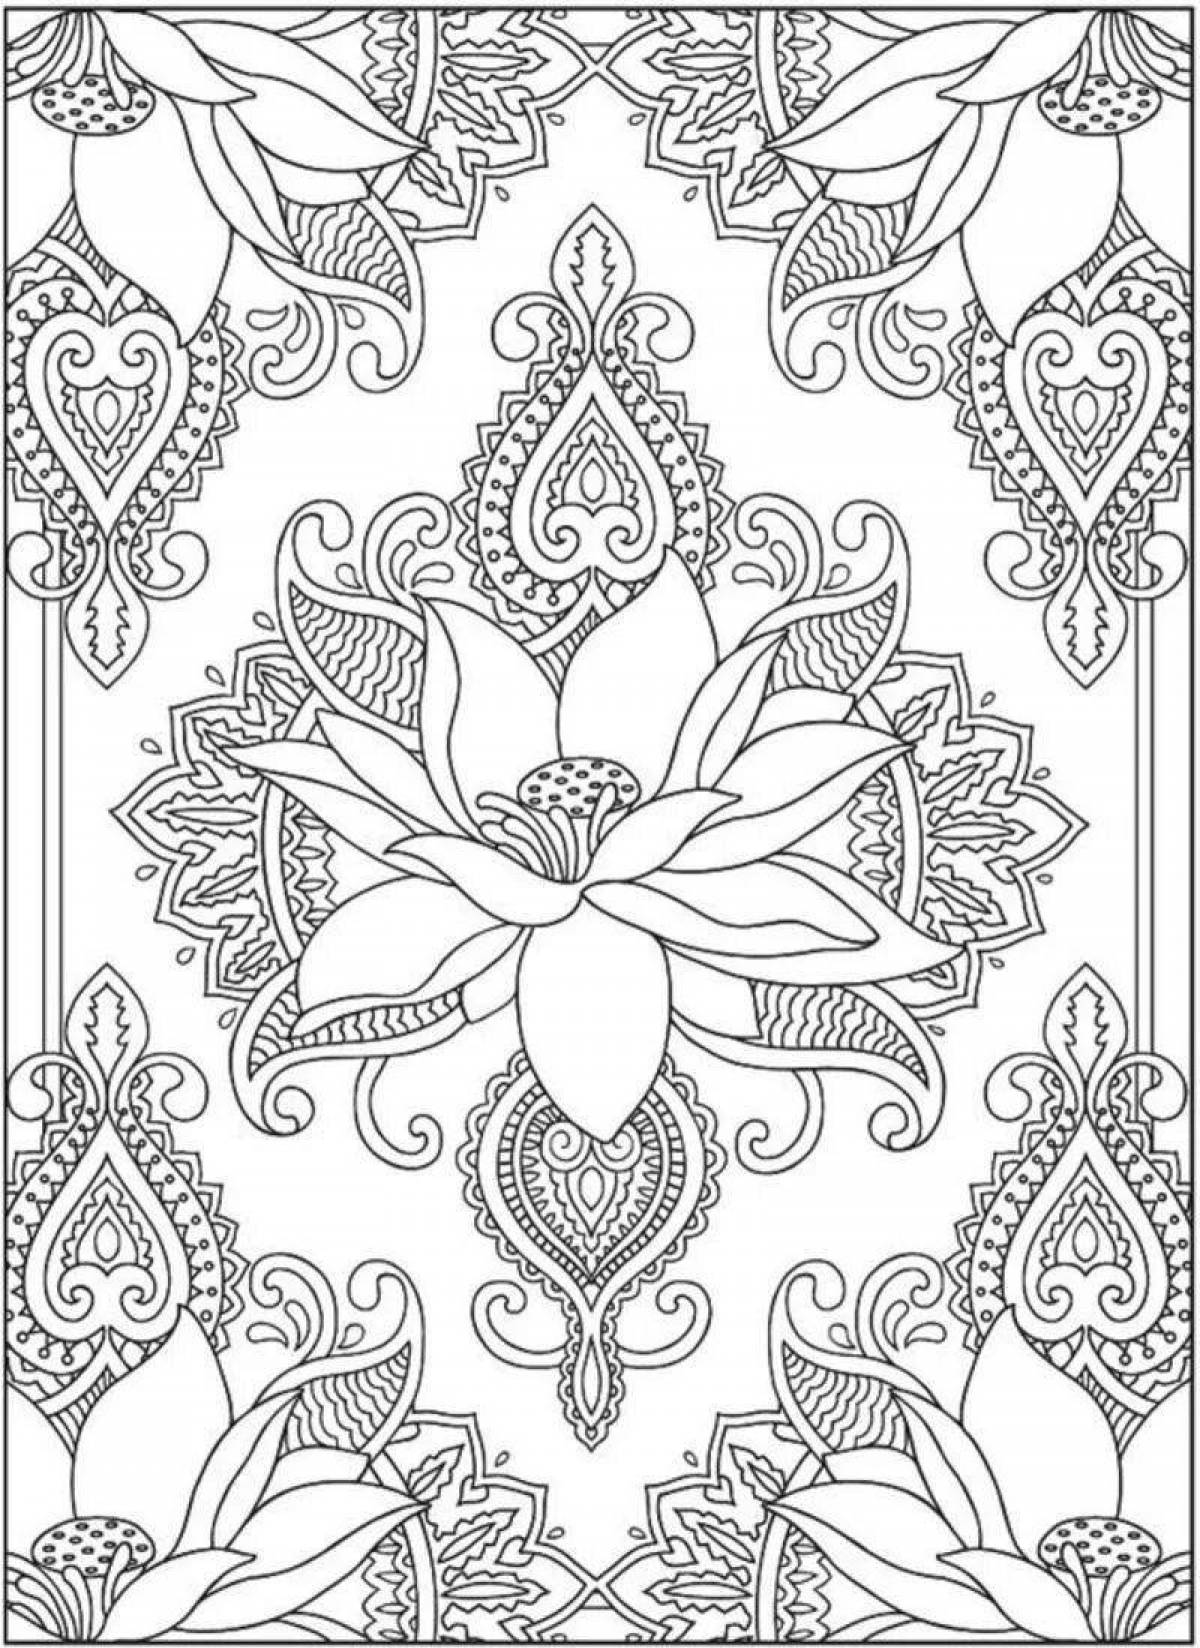 Fun coloring book relaxation